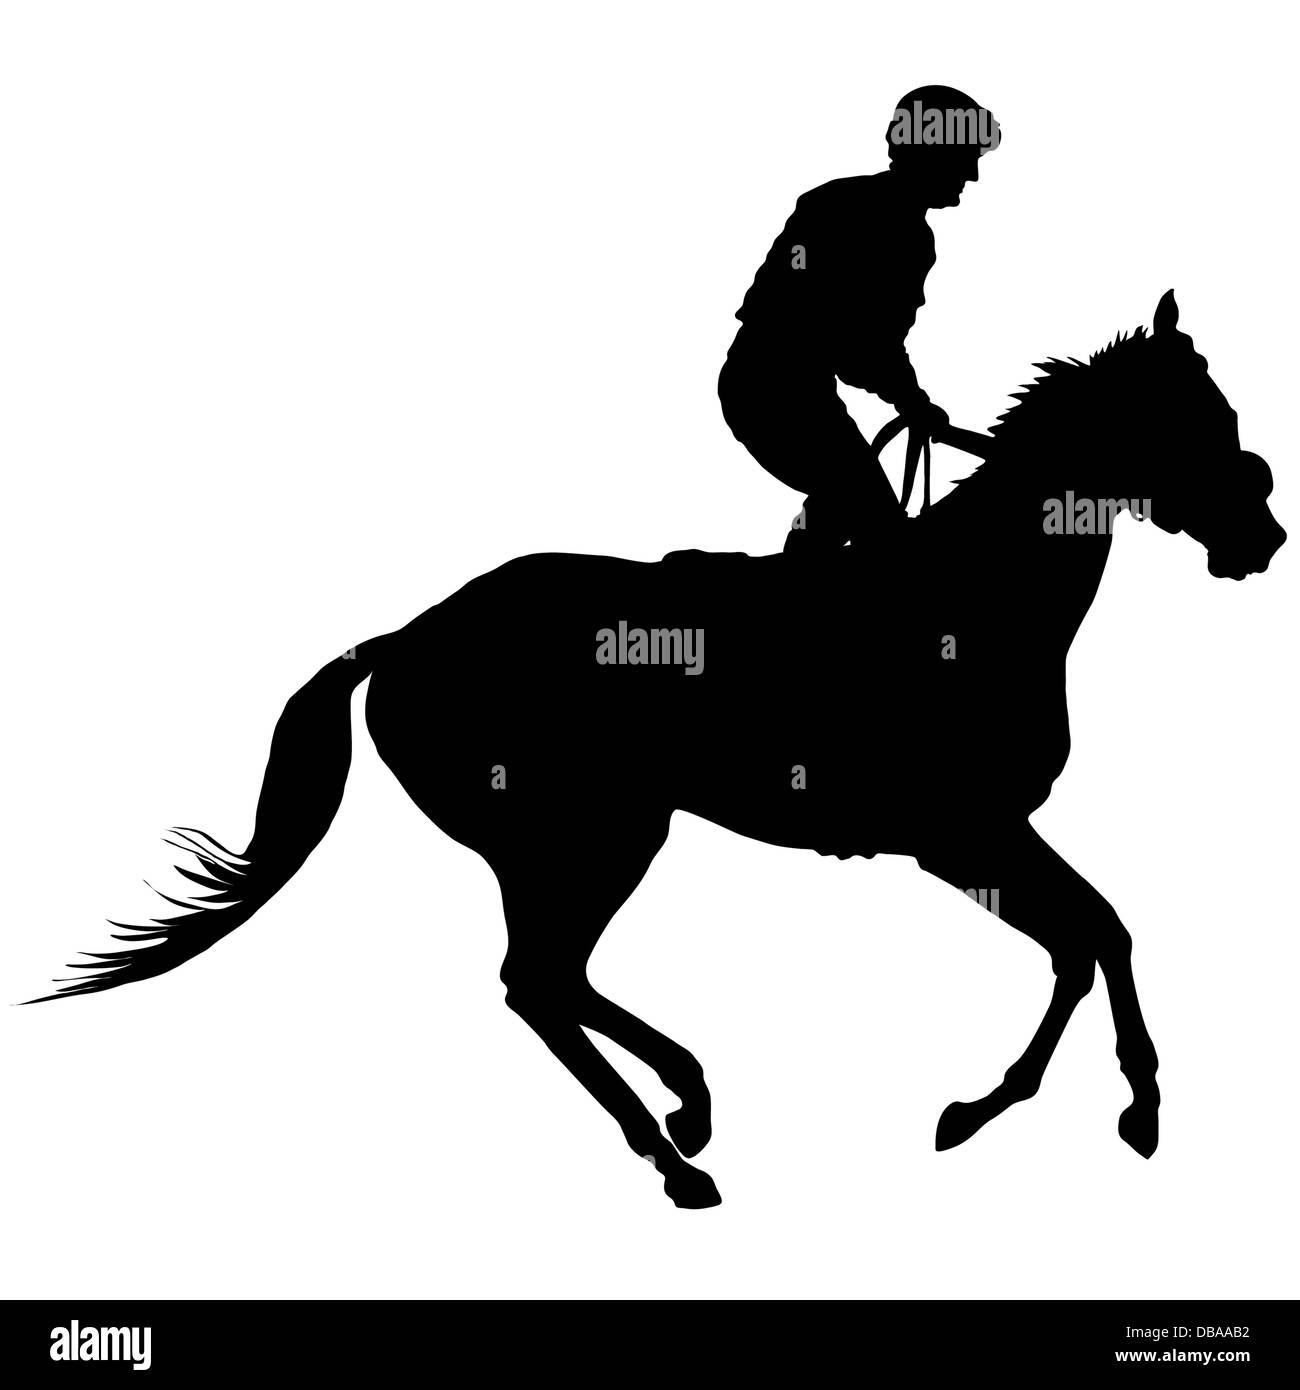 Silhouette of a jockey exercising his horse. Stock Photo